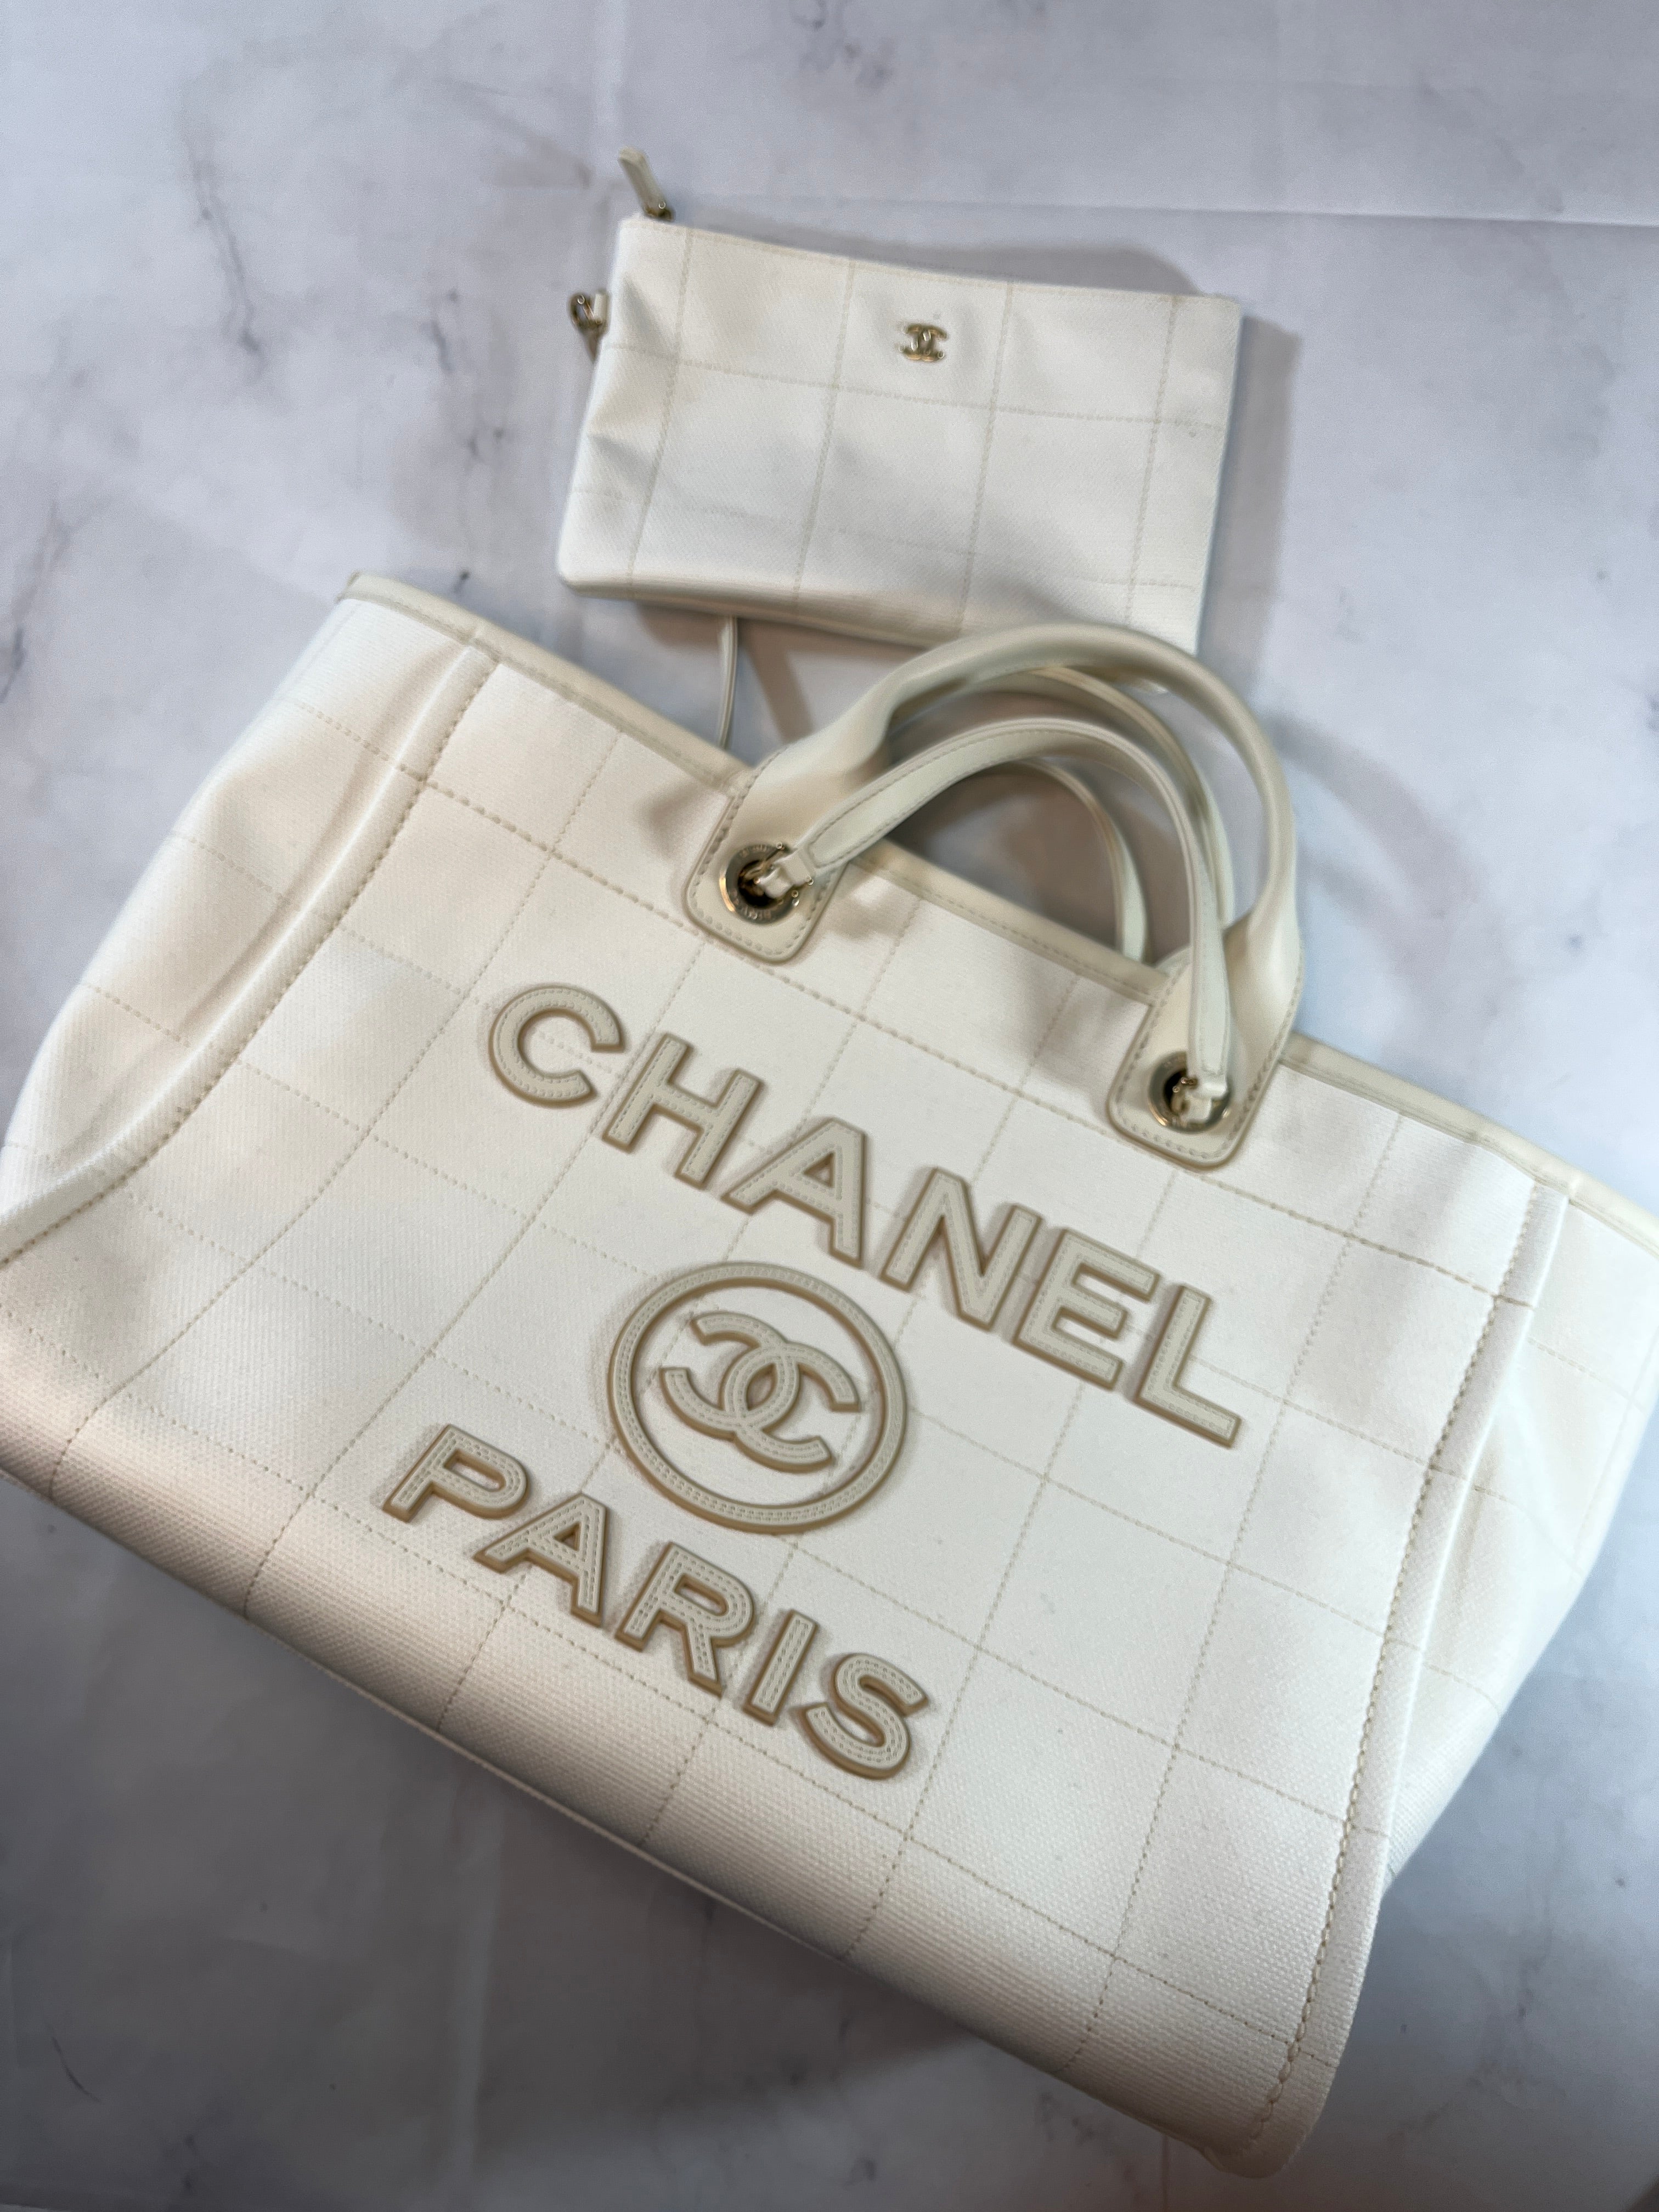 CHANEL, Bags, Chanel Deauville Tote Bag 23c Green New Nwt